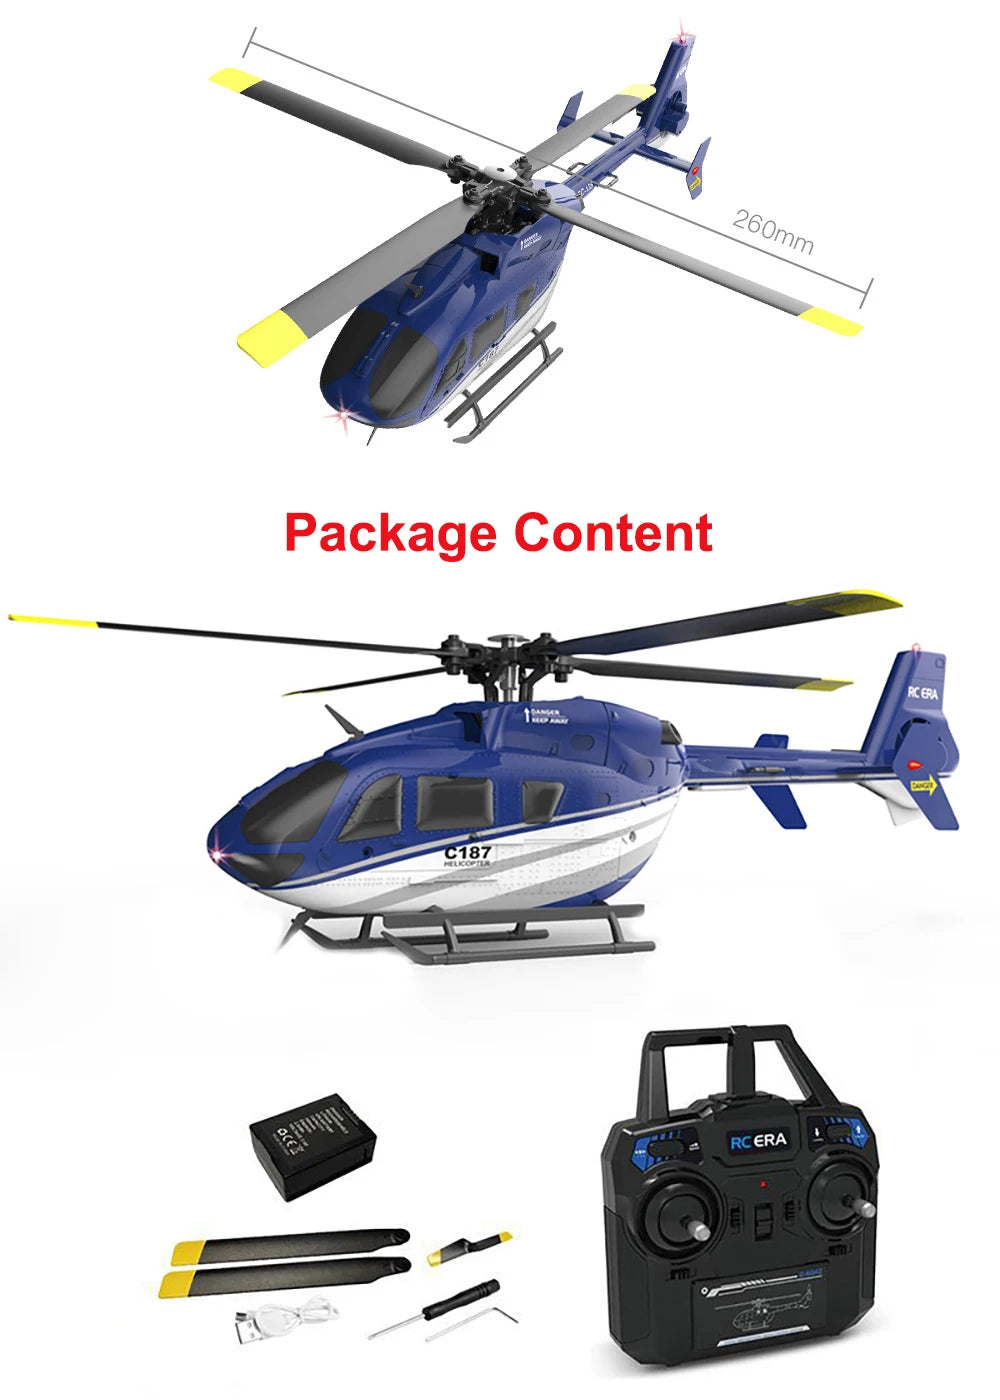 RC ERA C187 Rc Helicopter, Package Contents Rce "C187 RC ERA 260mm 9580